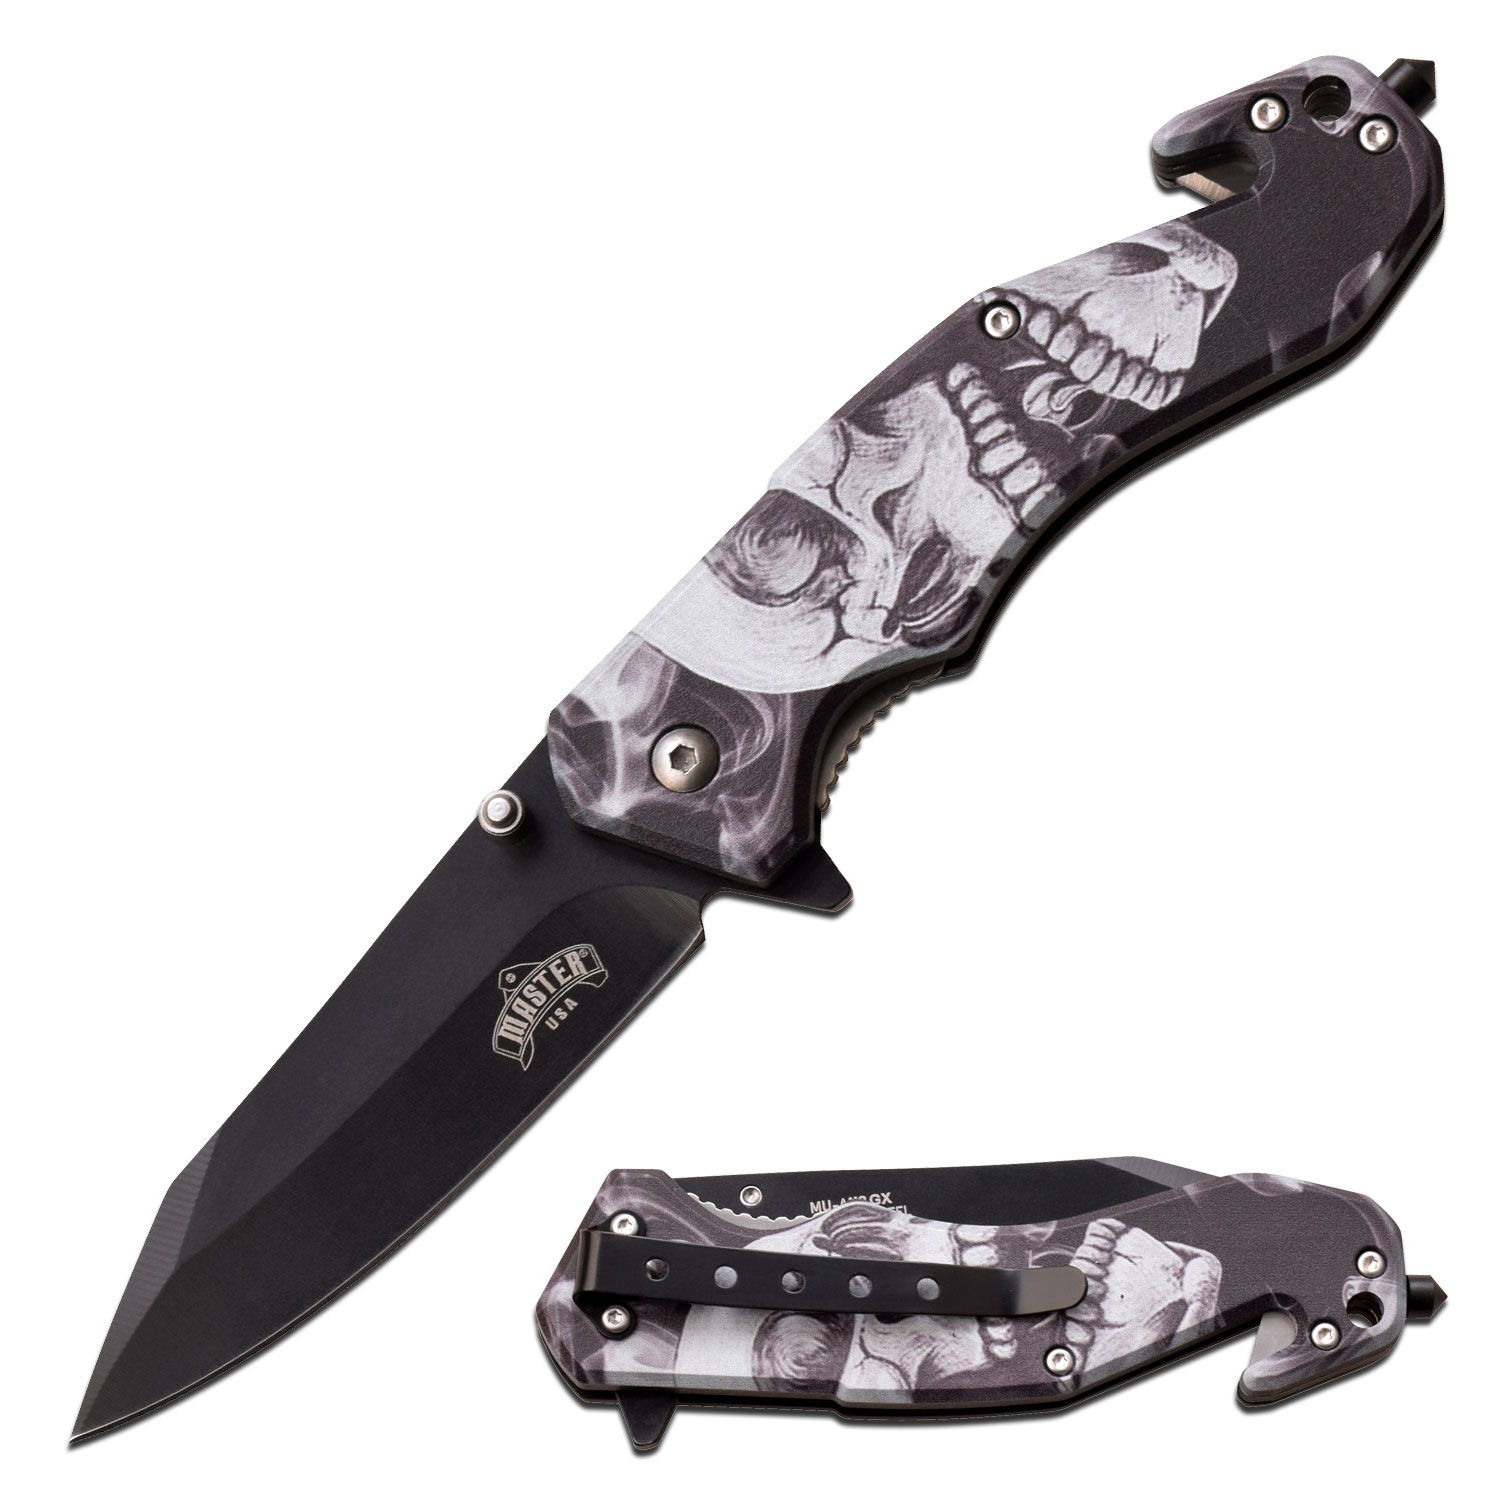 Spring-Assist Folding Knife 3.25In Black Blade Gray Skull Tactical Rescue EDC